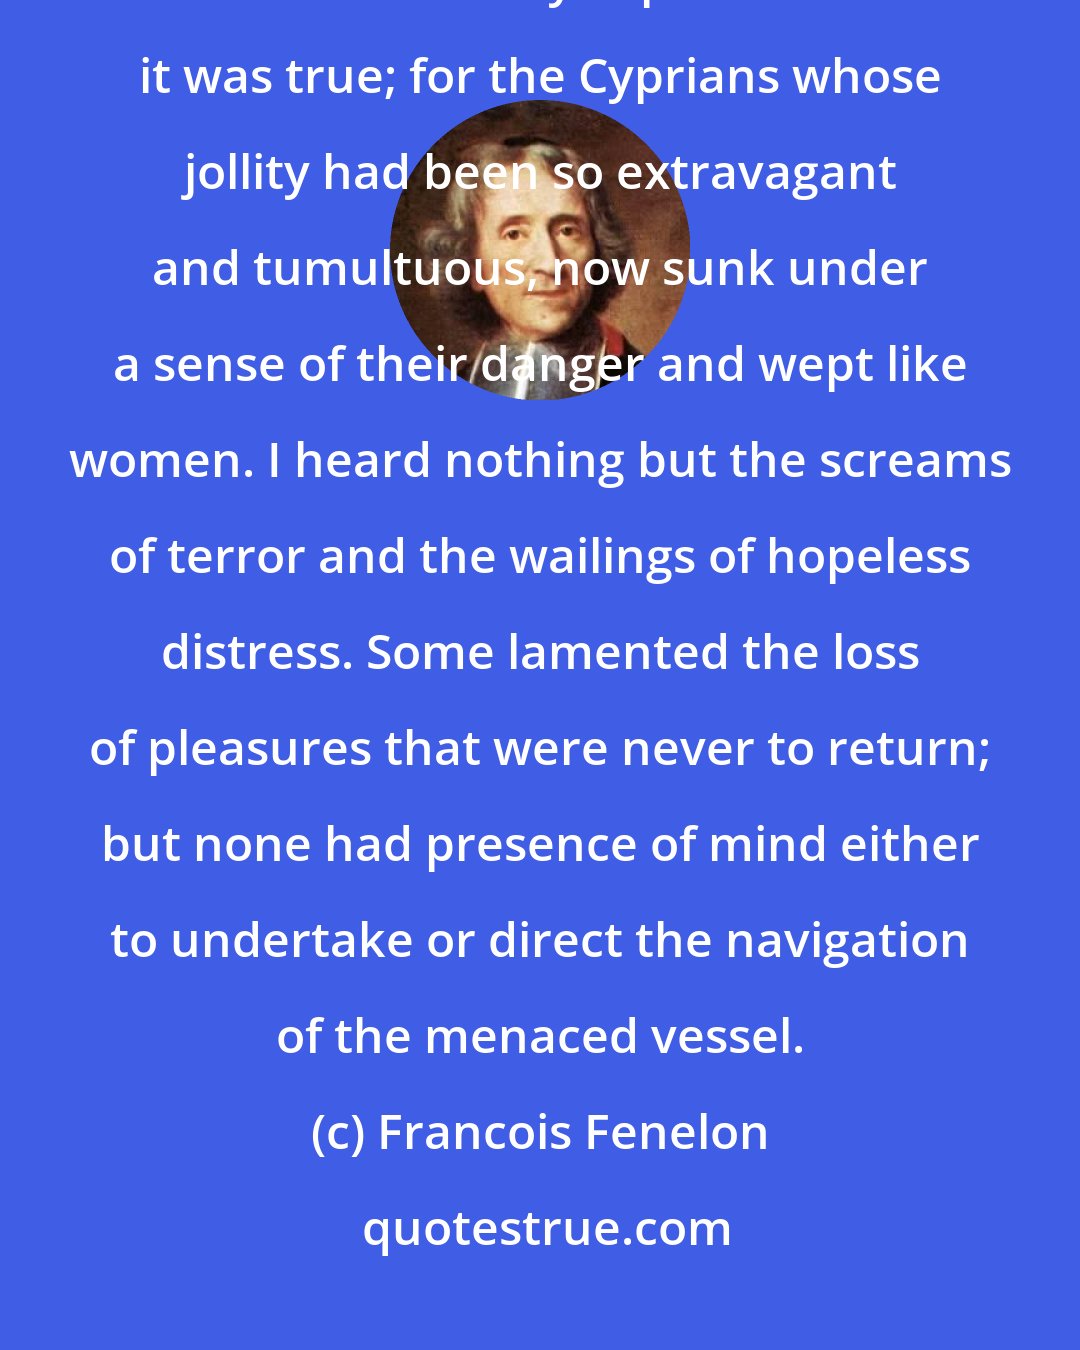 Francois Fenelon: I had often heard Mentor say, that the voluptuous were never brave, and I now found by experience that it was true; for the Cyprians whose jollity had been so extravagant and tumultuous, now sunk under a sense of their danger and wept like women. I heard nothing but the screams of terror and the wailings of hopeless distress. Some lamented the loss of pleasures that were never to return; but none had presence of mind either to undertake or direct the navigation of the menaced vessel.